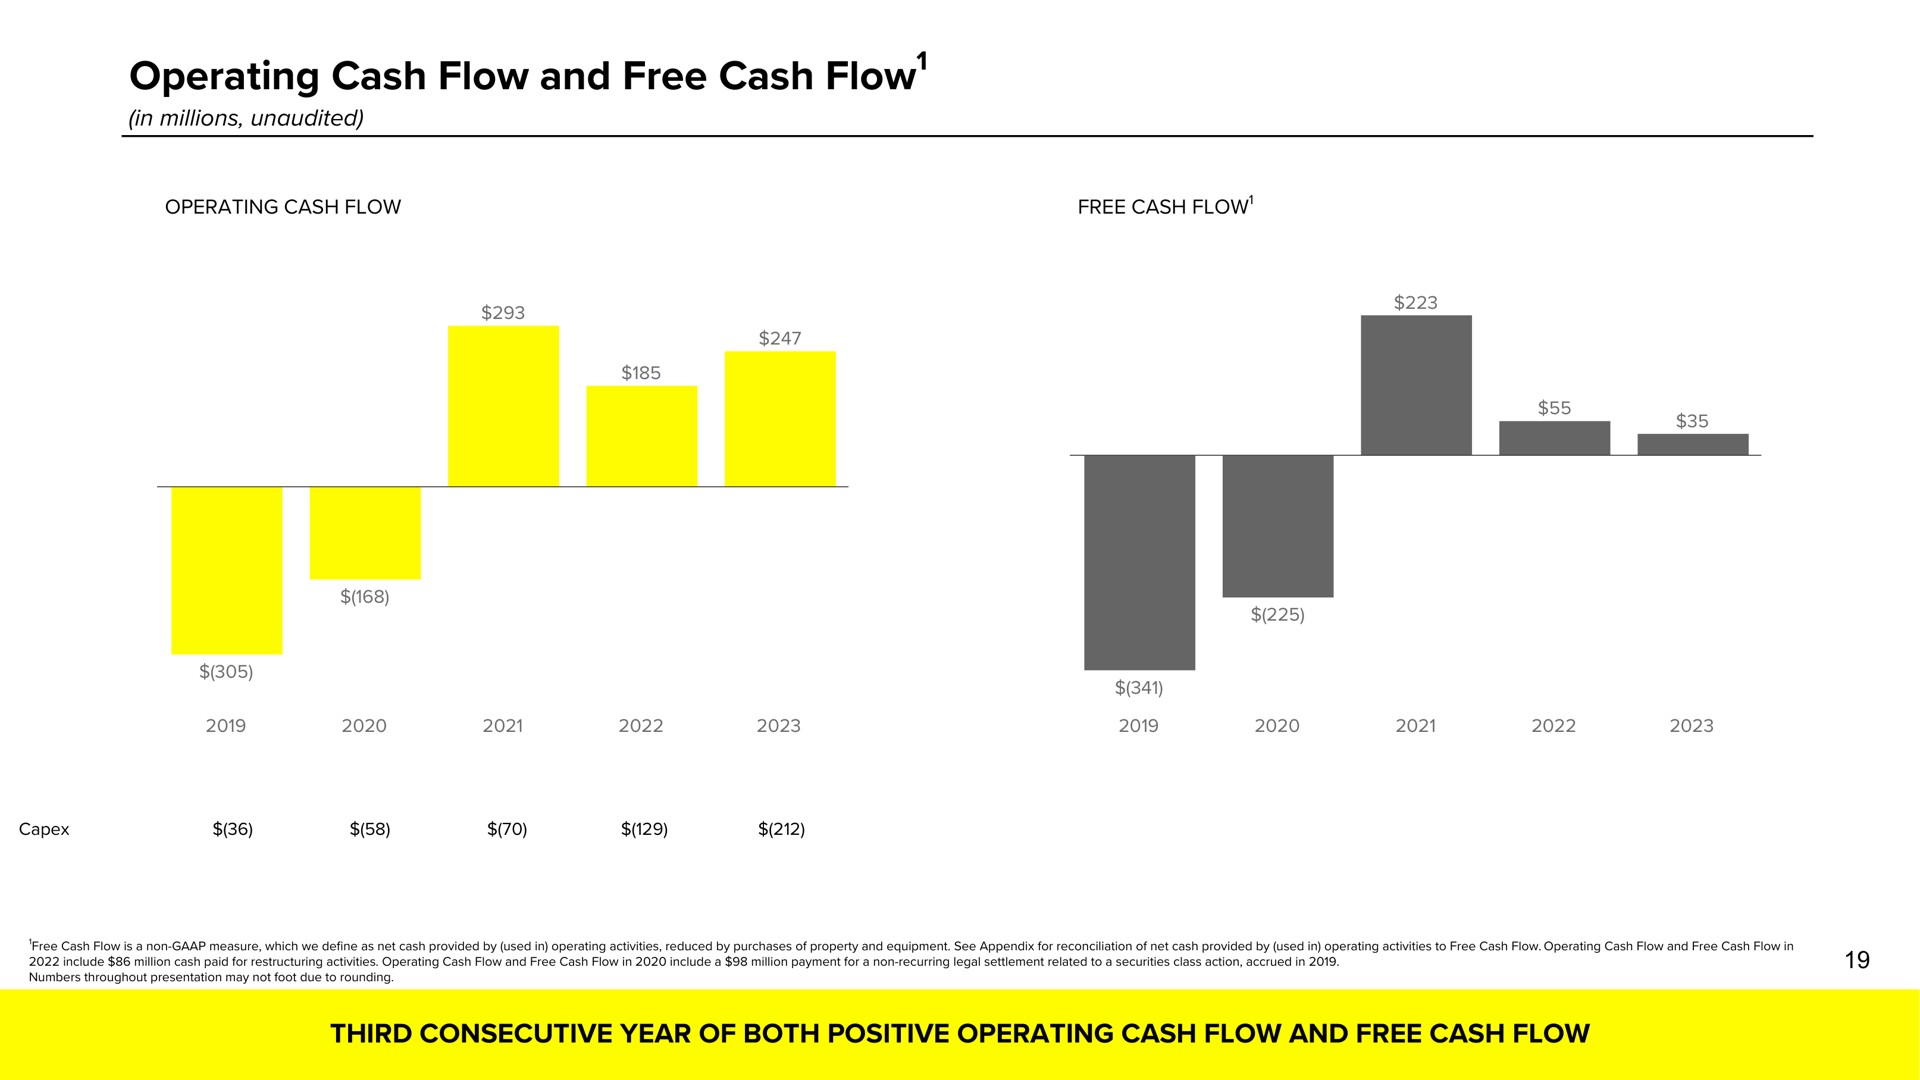 operating cash flow and free cash flow | Snap Inc